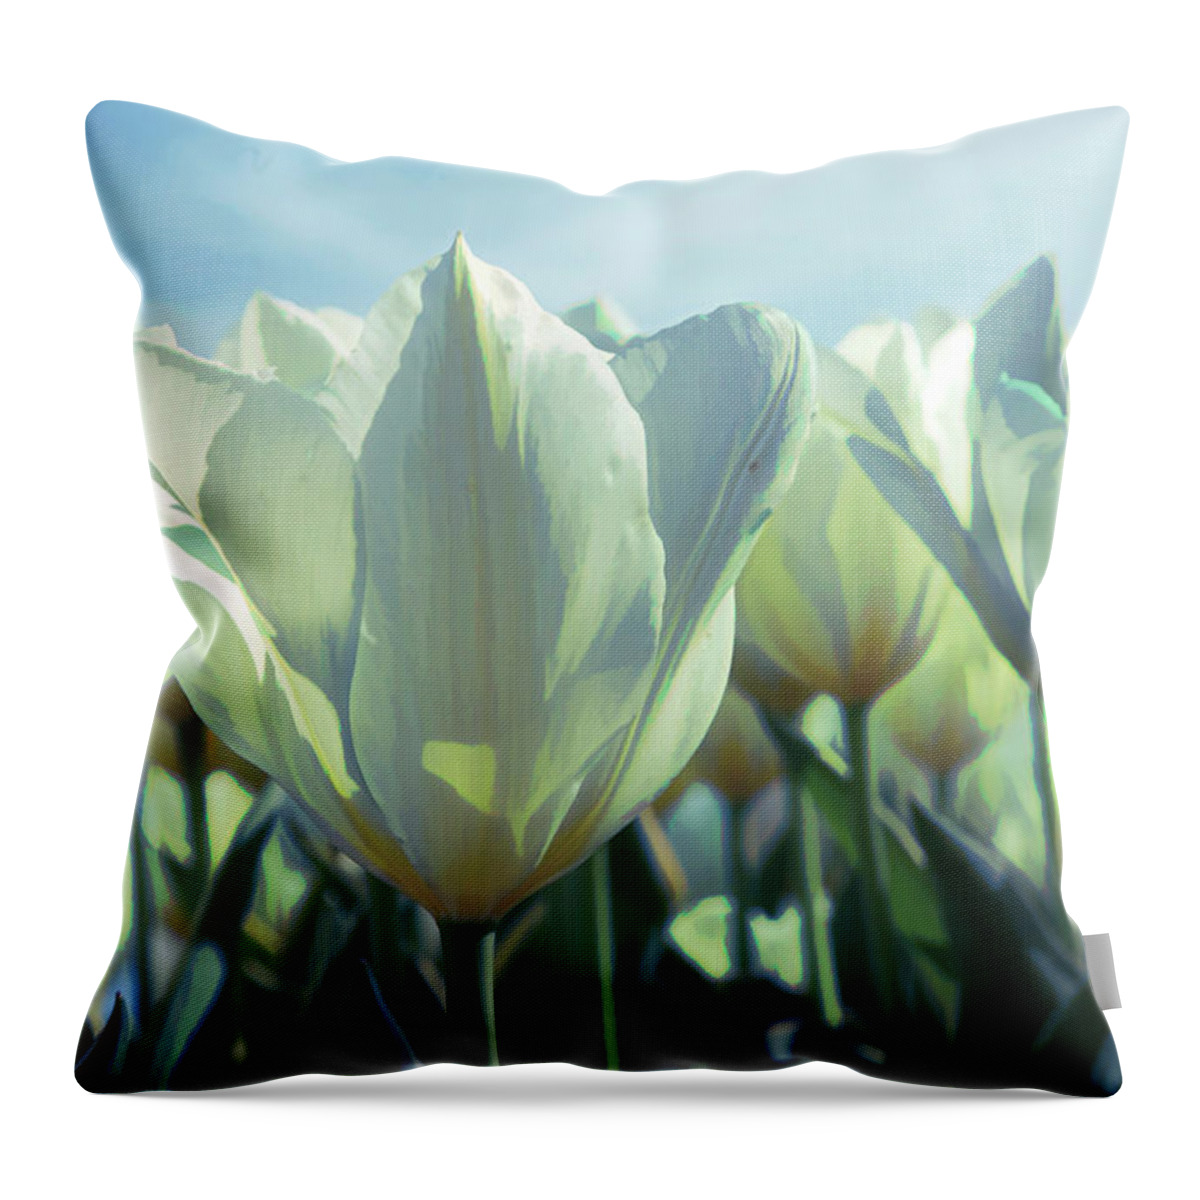 White Tulips Throw Pillow featuring the photograph White Tulips by Steve Ladner